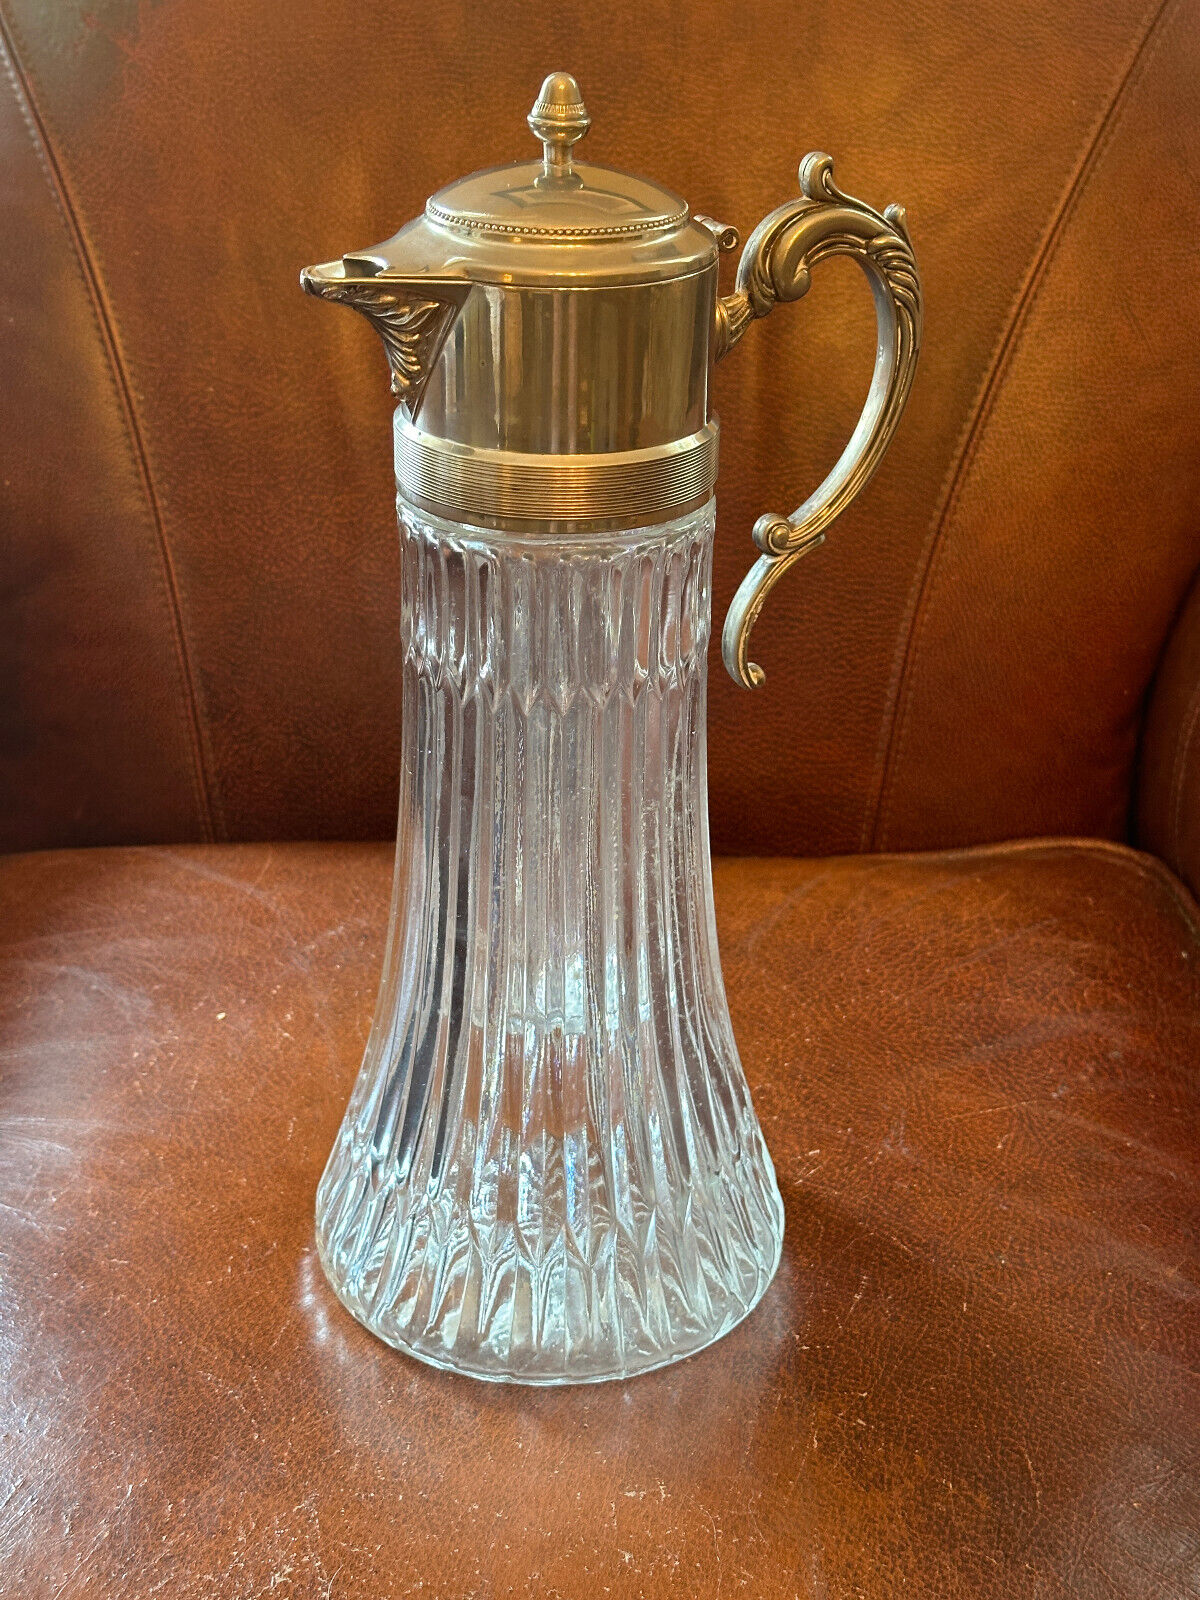 Decanter, glass and silverplate, art deco, with ice holder insert